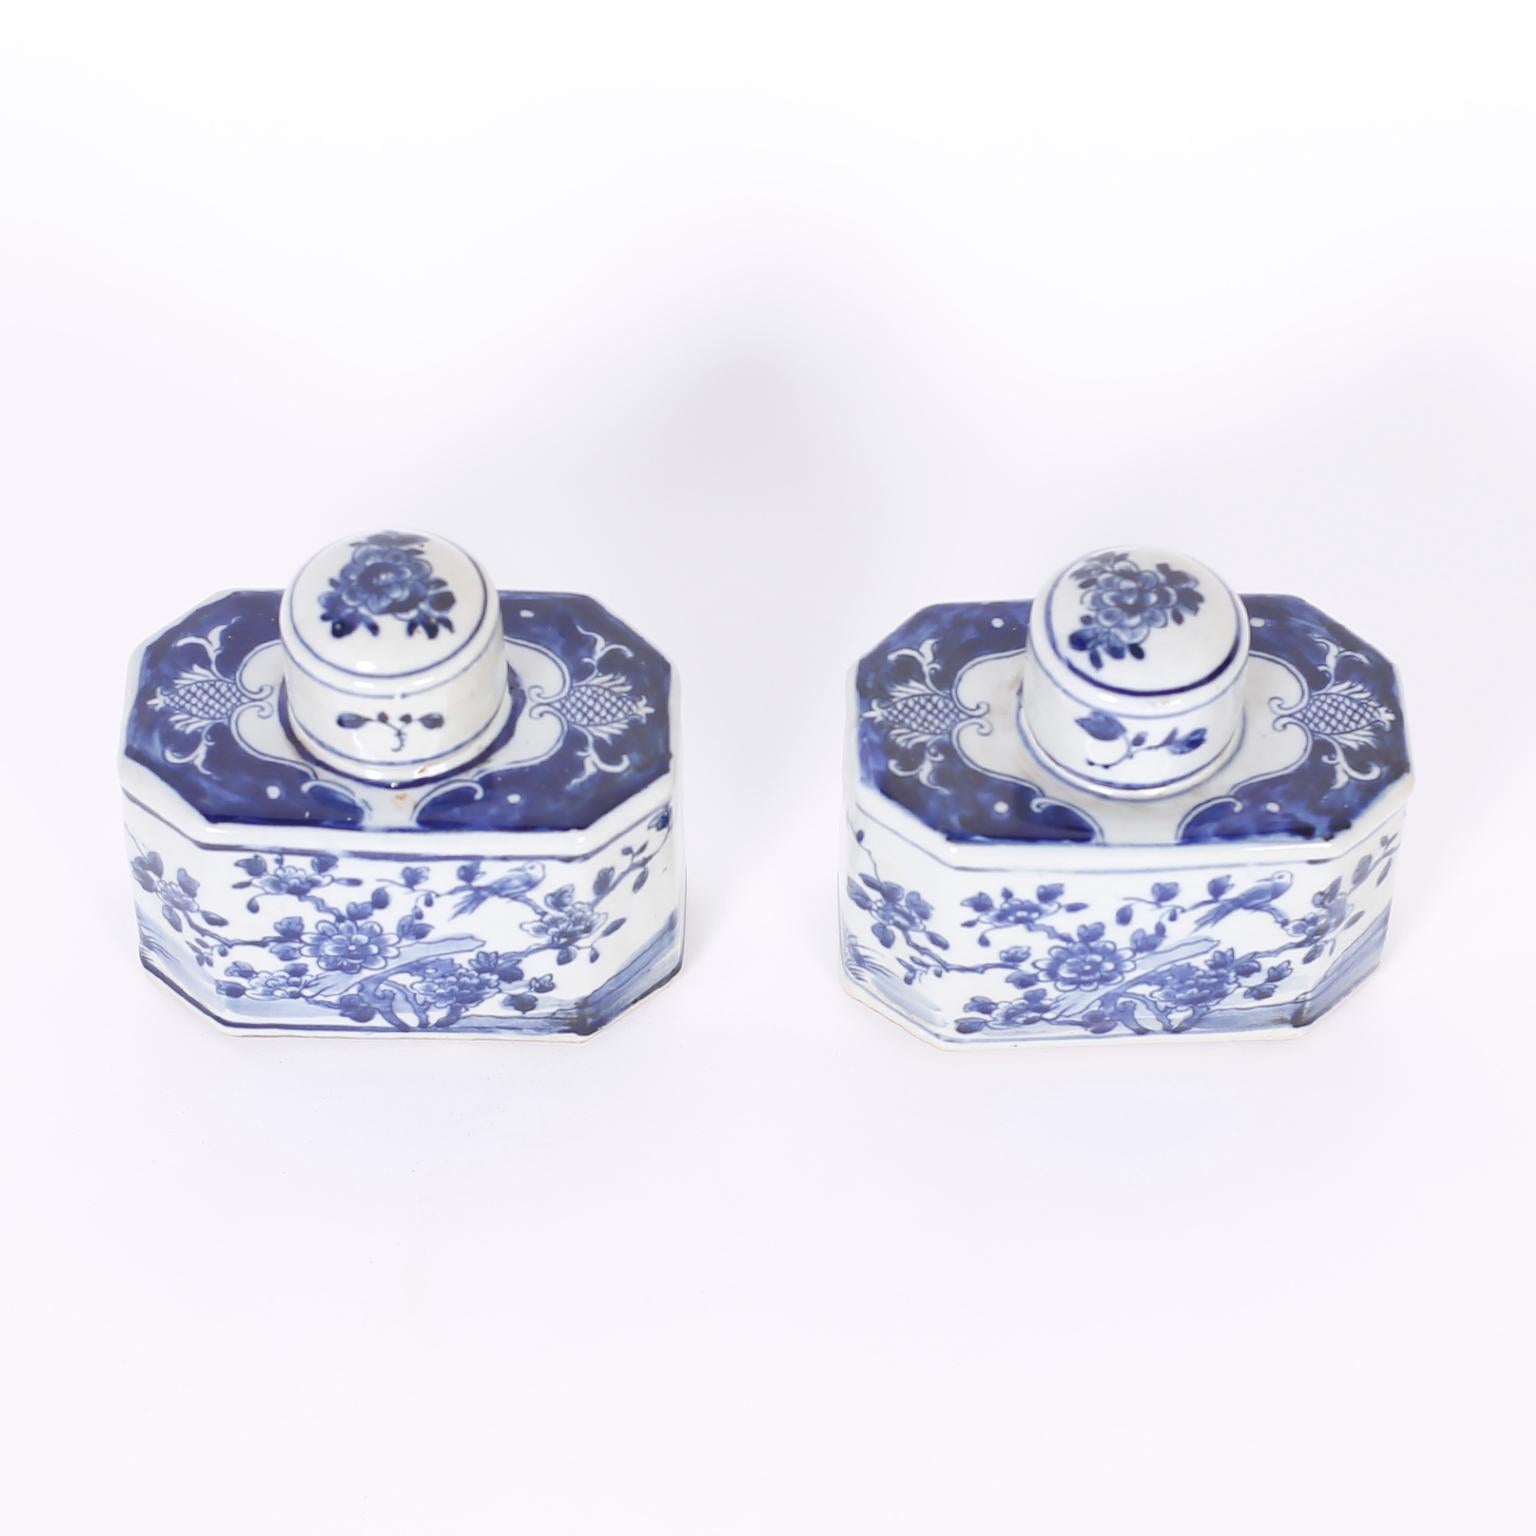 Pair of Blue and White Porcelain Tea Caddies with Flowers In Good Condition For Sale In Palm Beach, FL